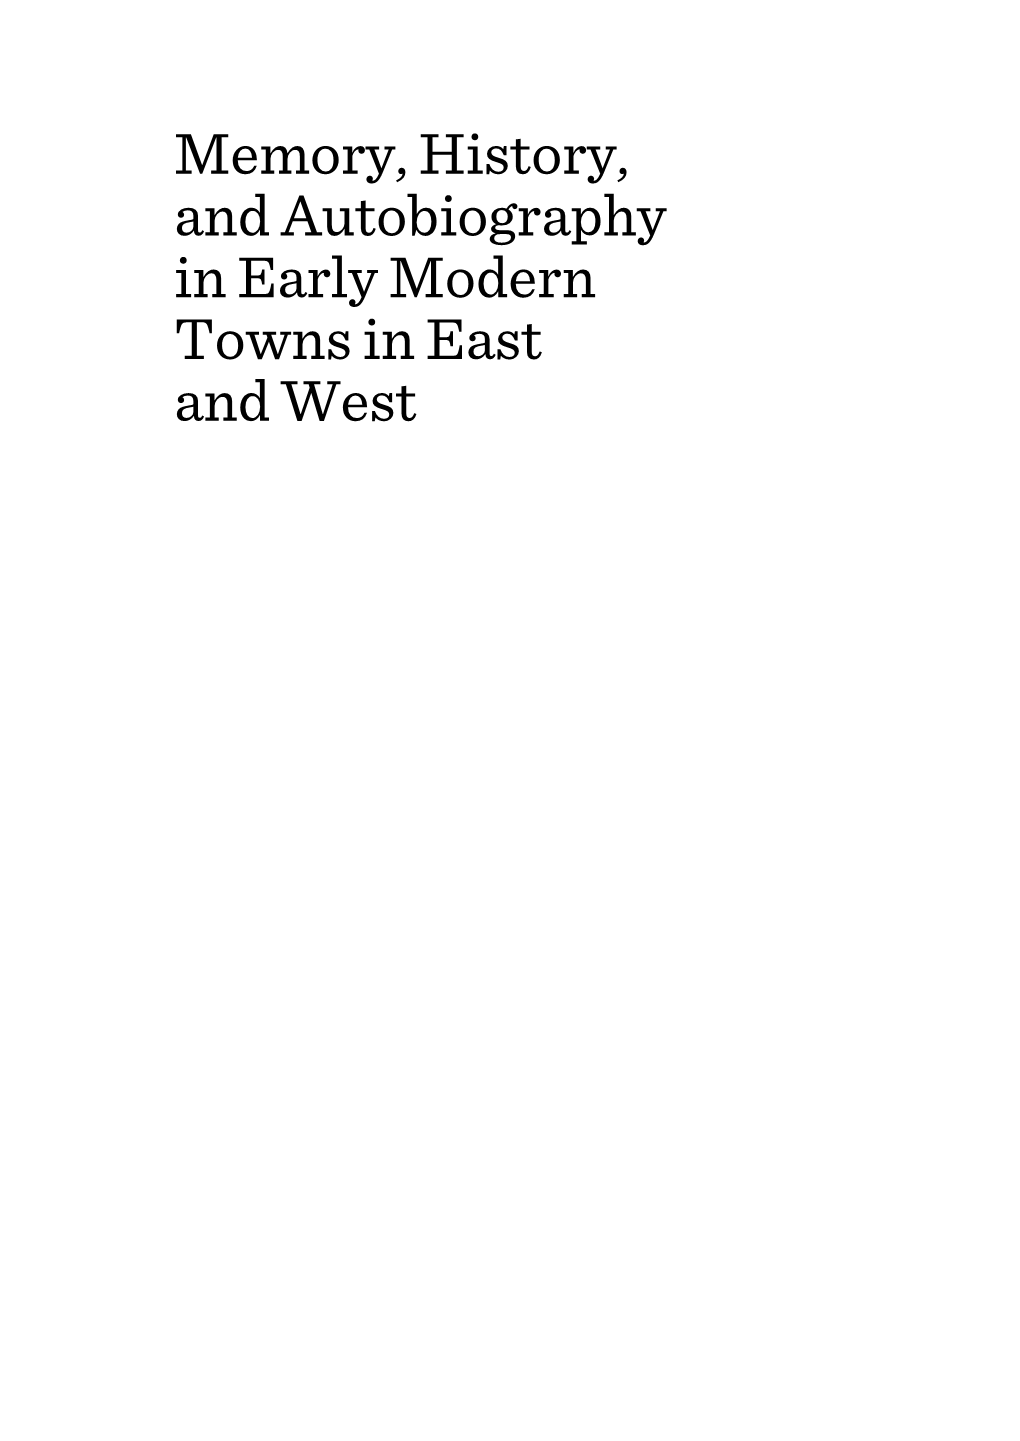 Memory, History, and Autobiography in Early Modern Towns in East and West